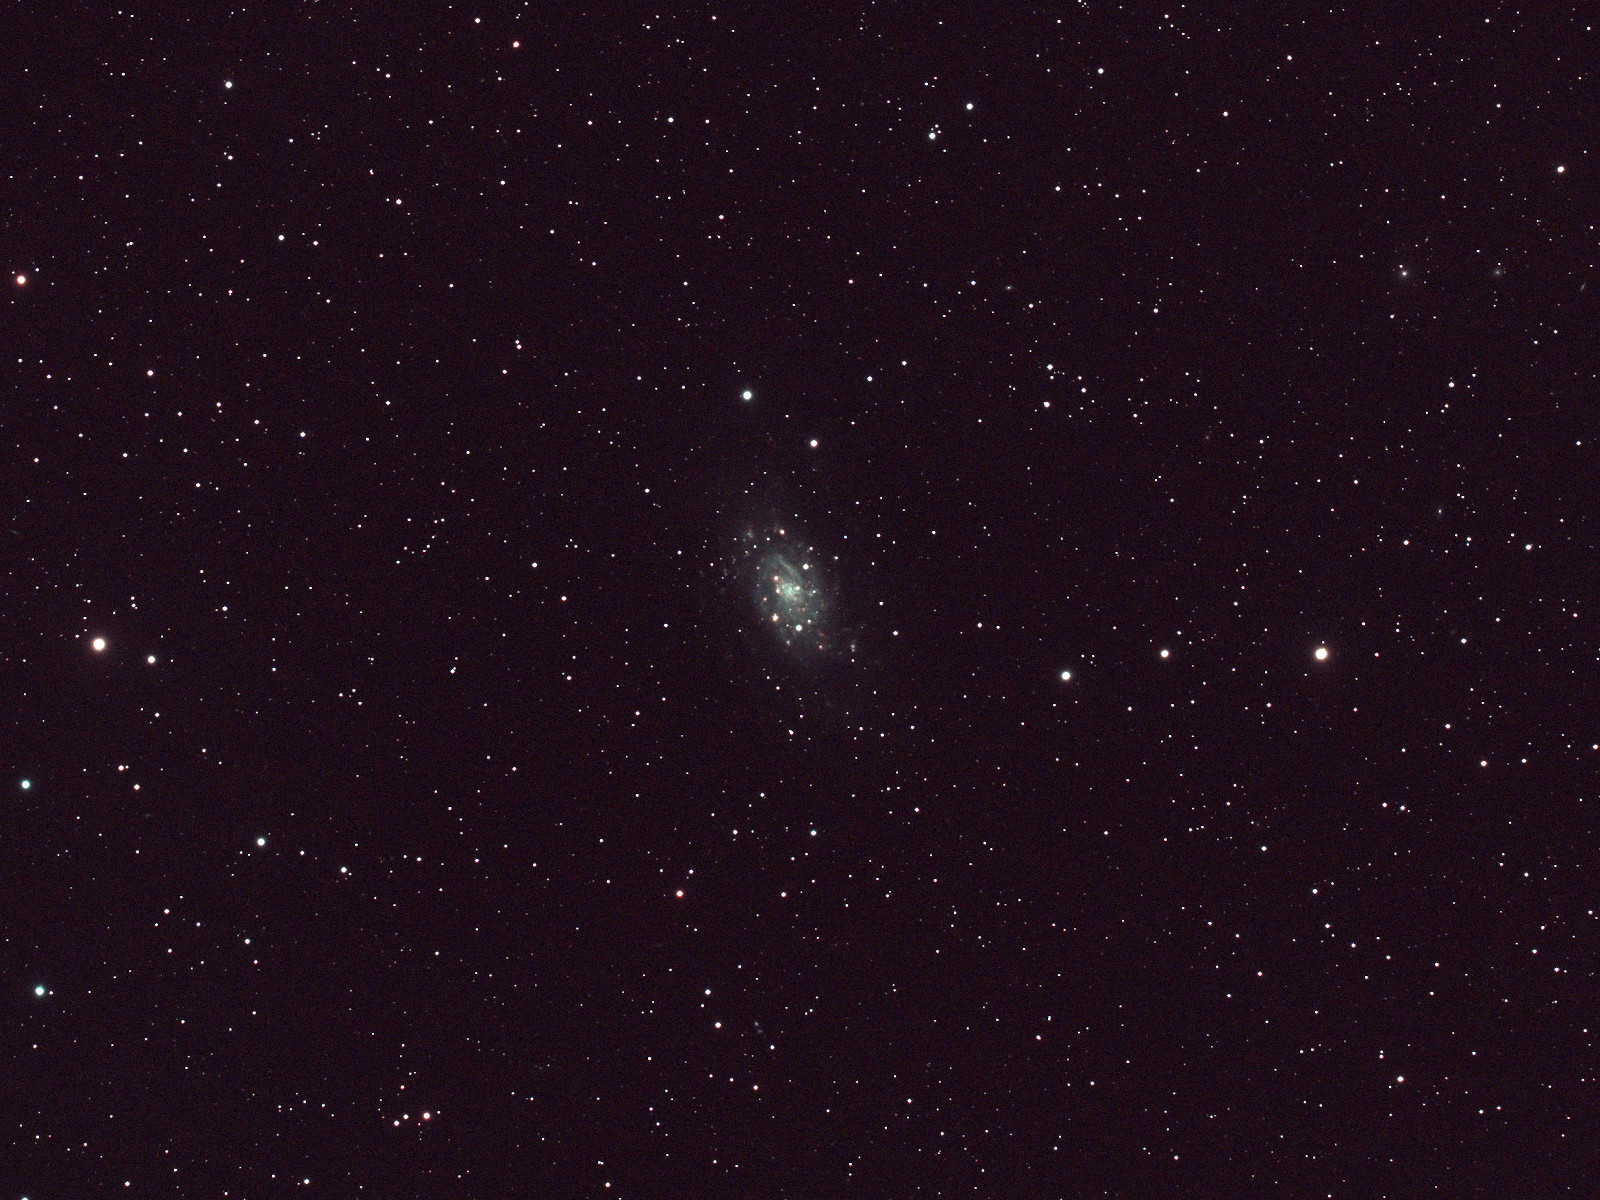 NGC2403 - small image of a spiral galaxy